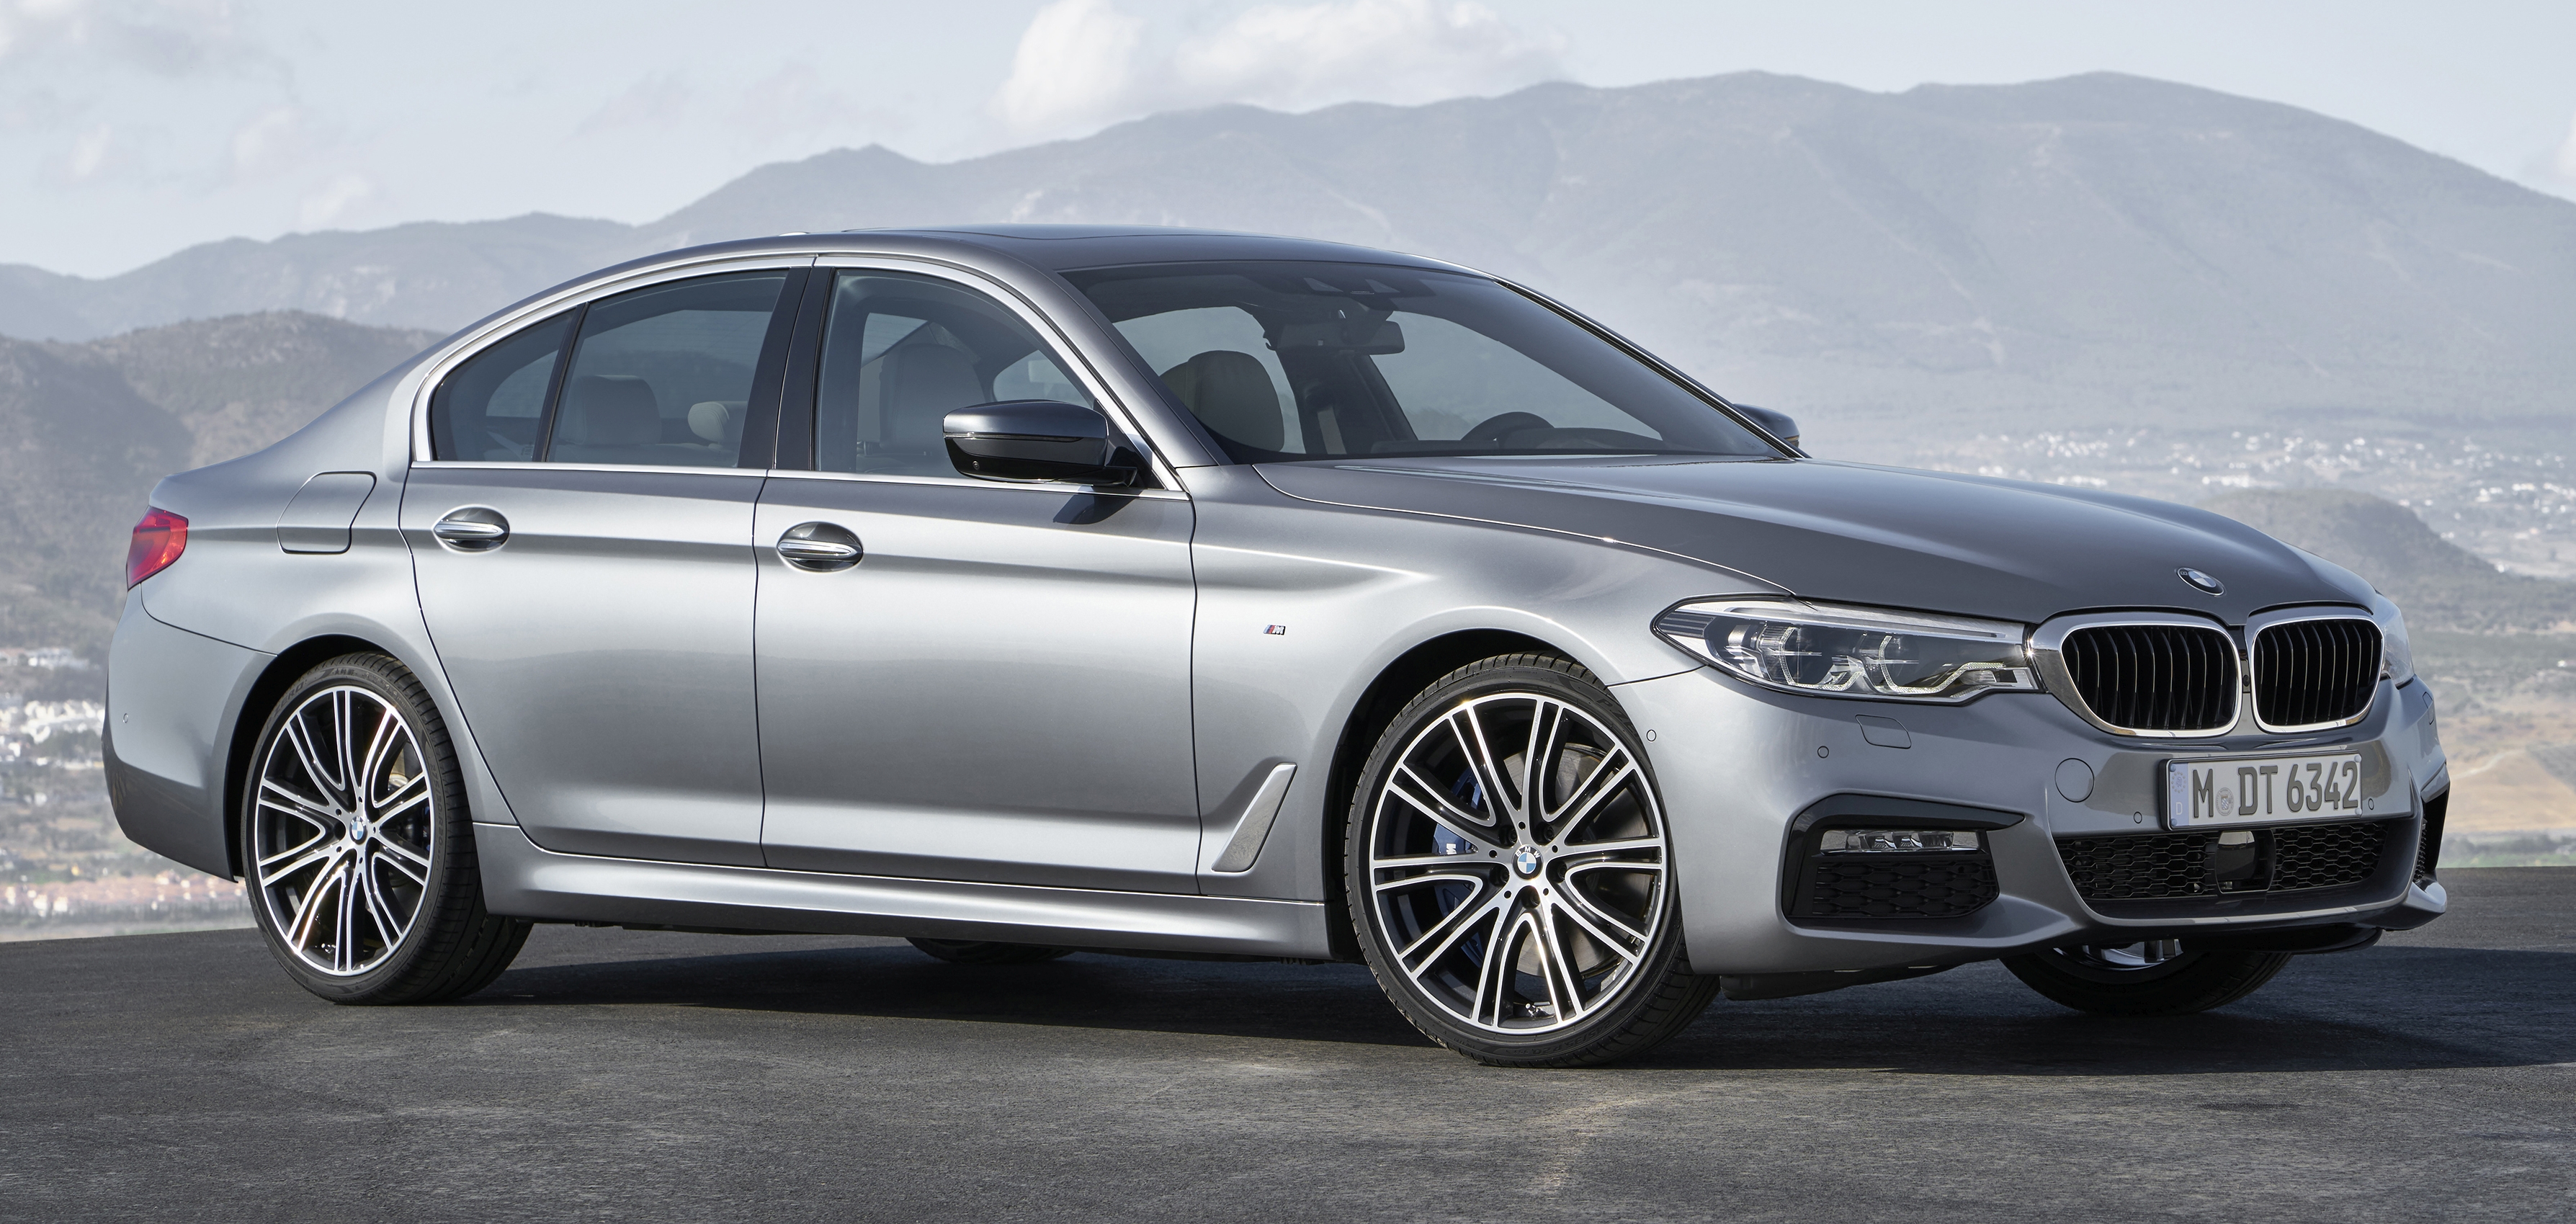 G30 BMW 5 Series unveiled - market debut in Feb 2017 